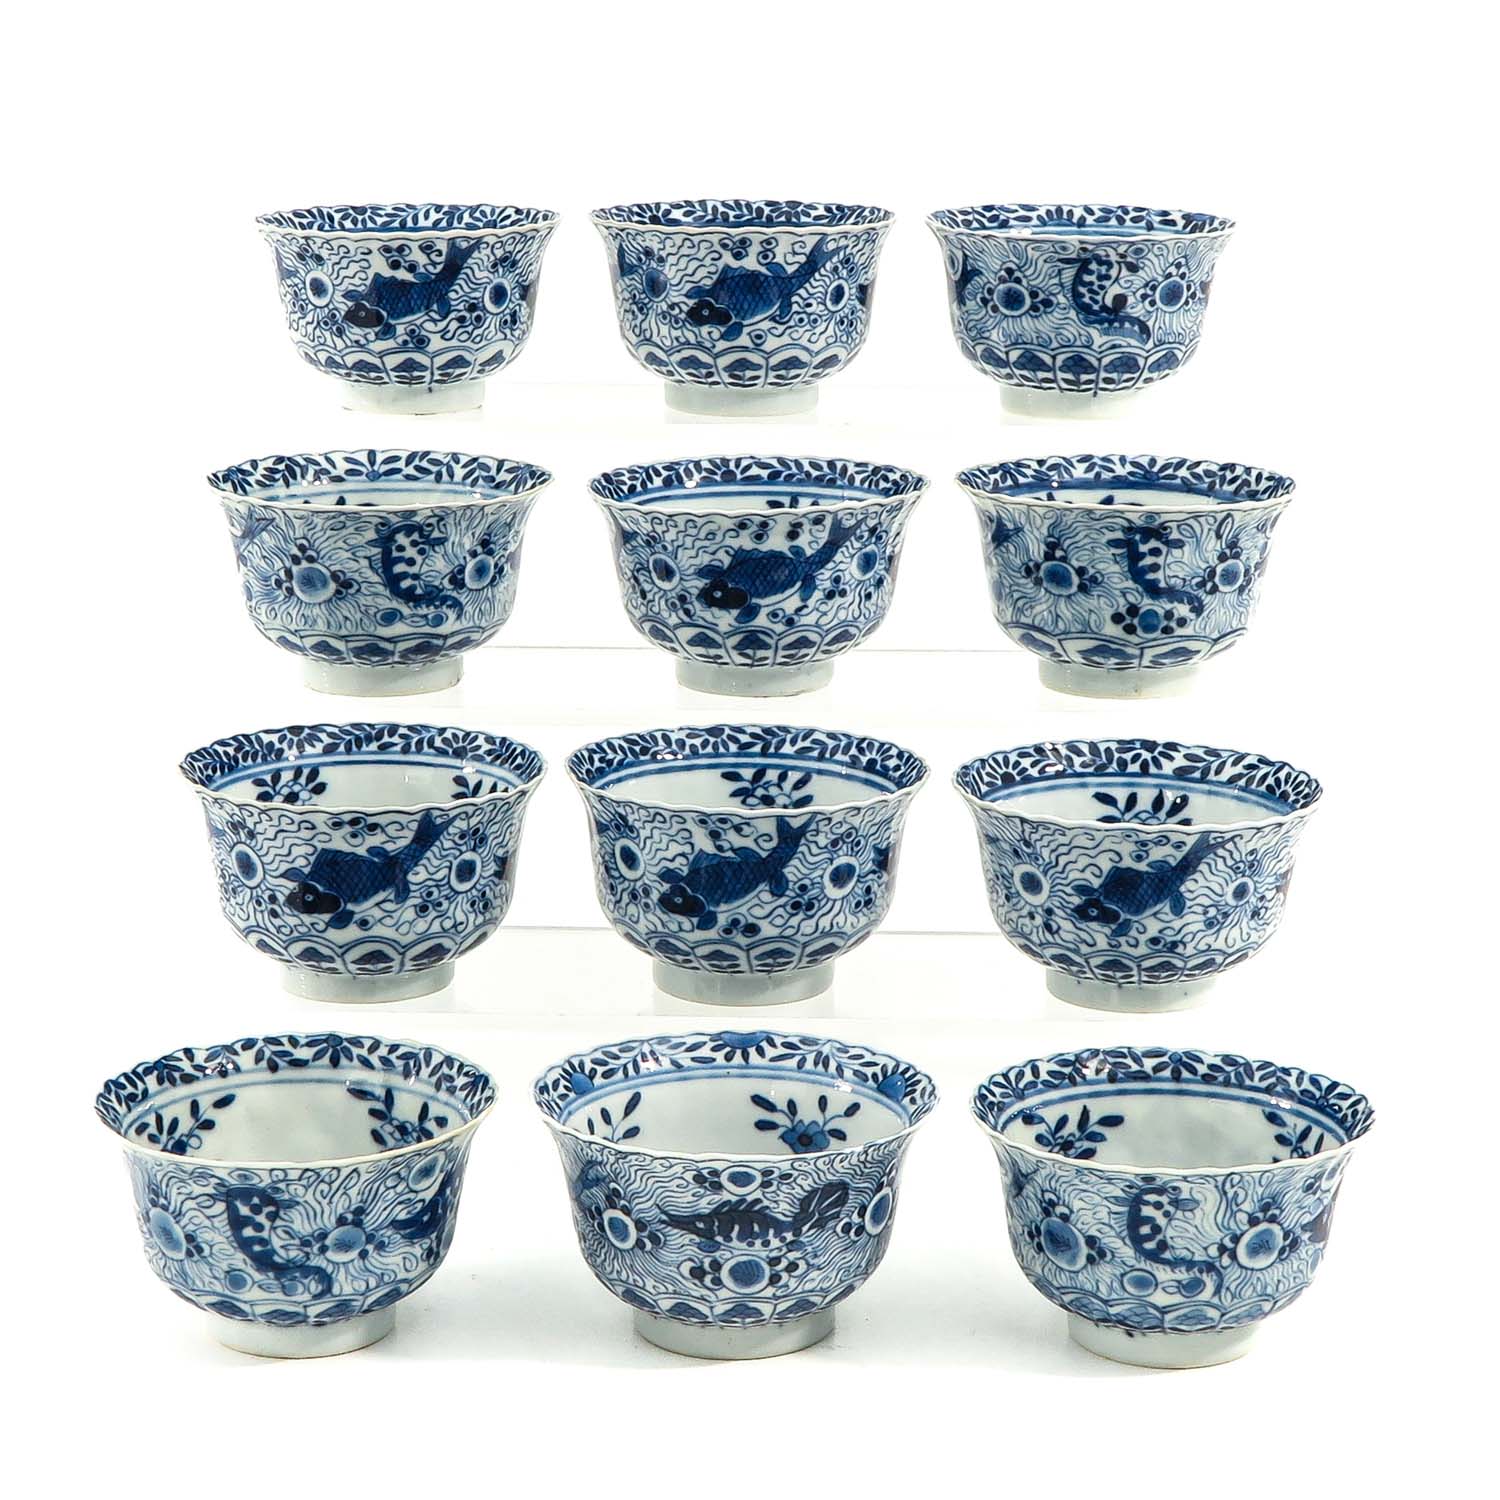 A Series of 12 Cups and Saucers - Image 2 of 10